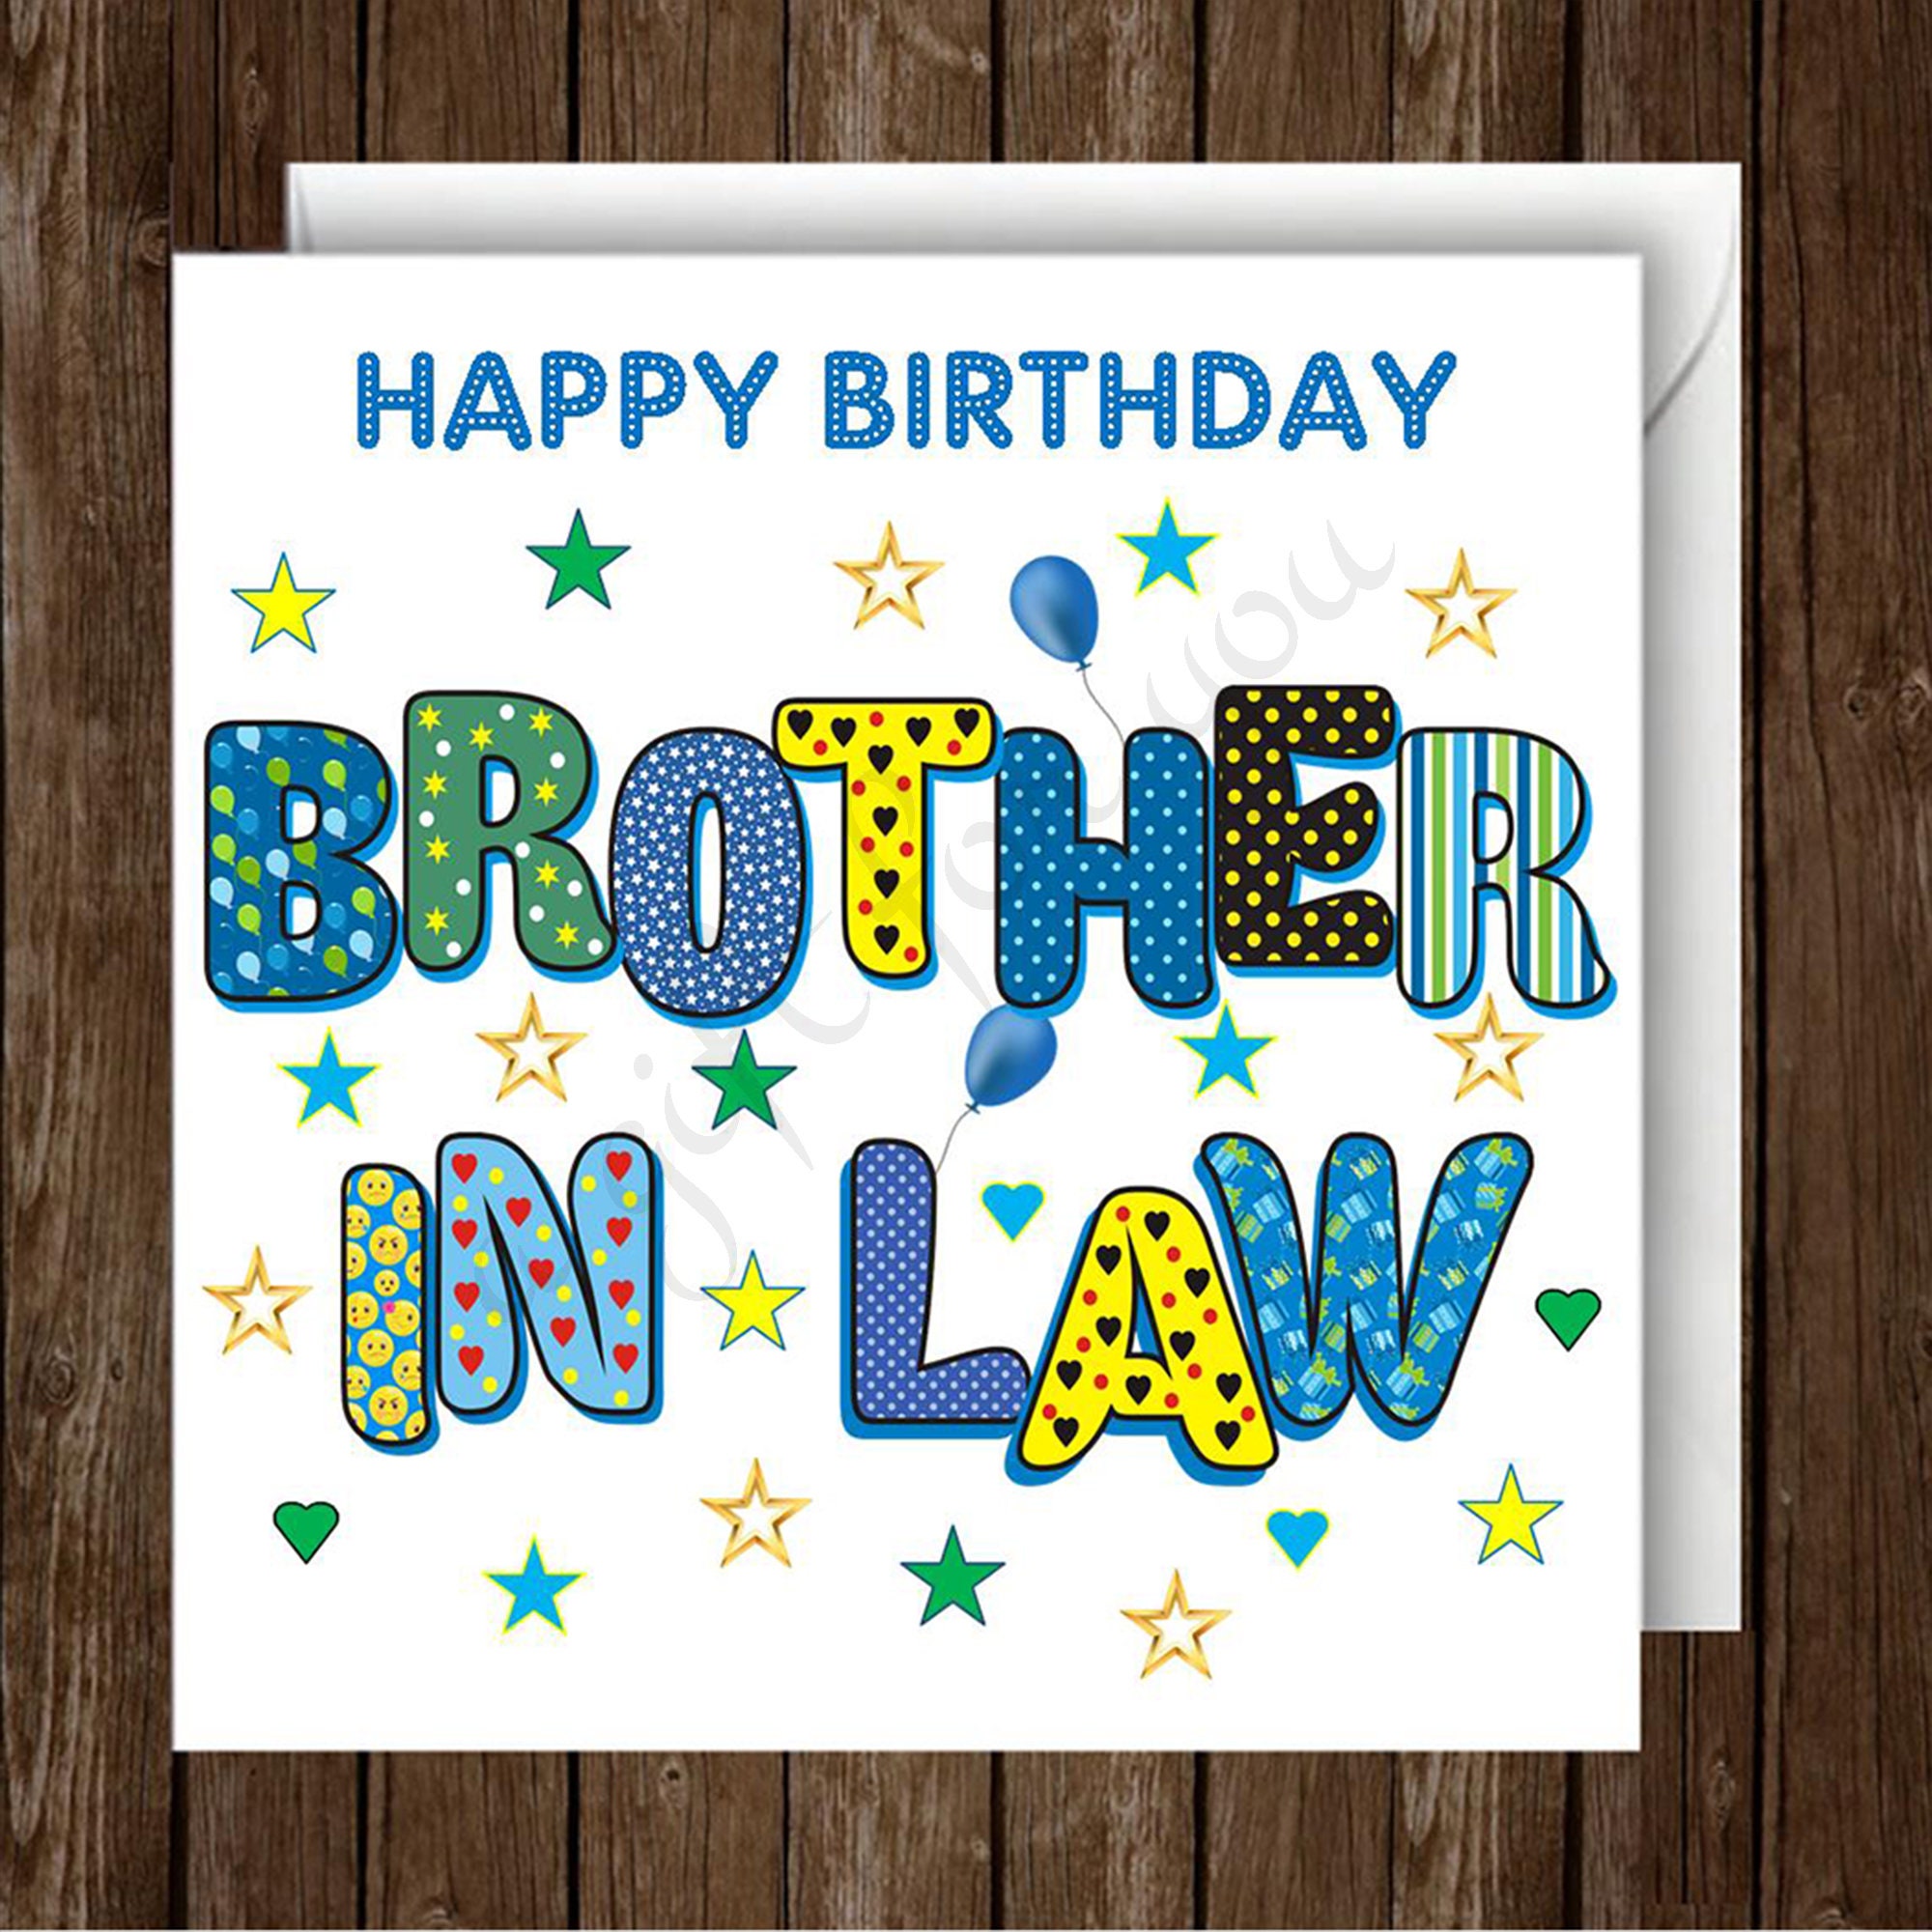 Happy Birthday Brother In Law Images